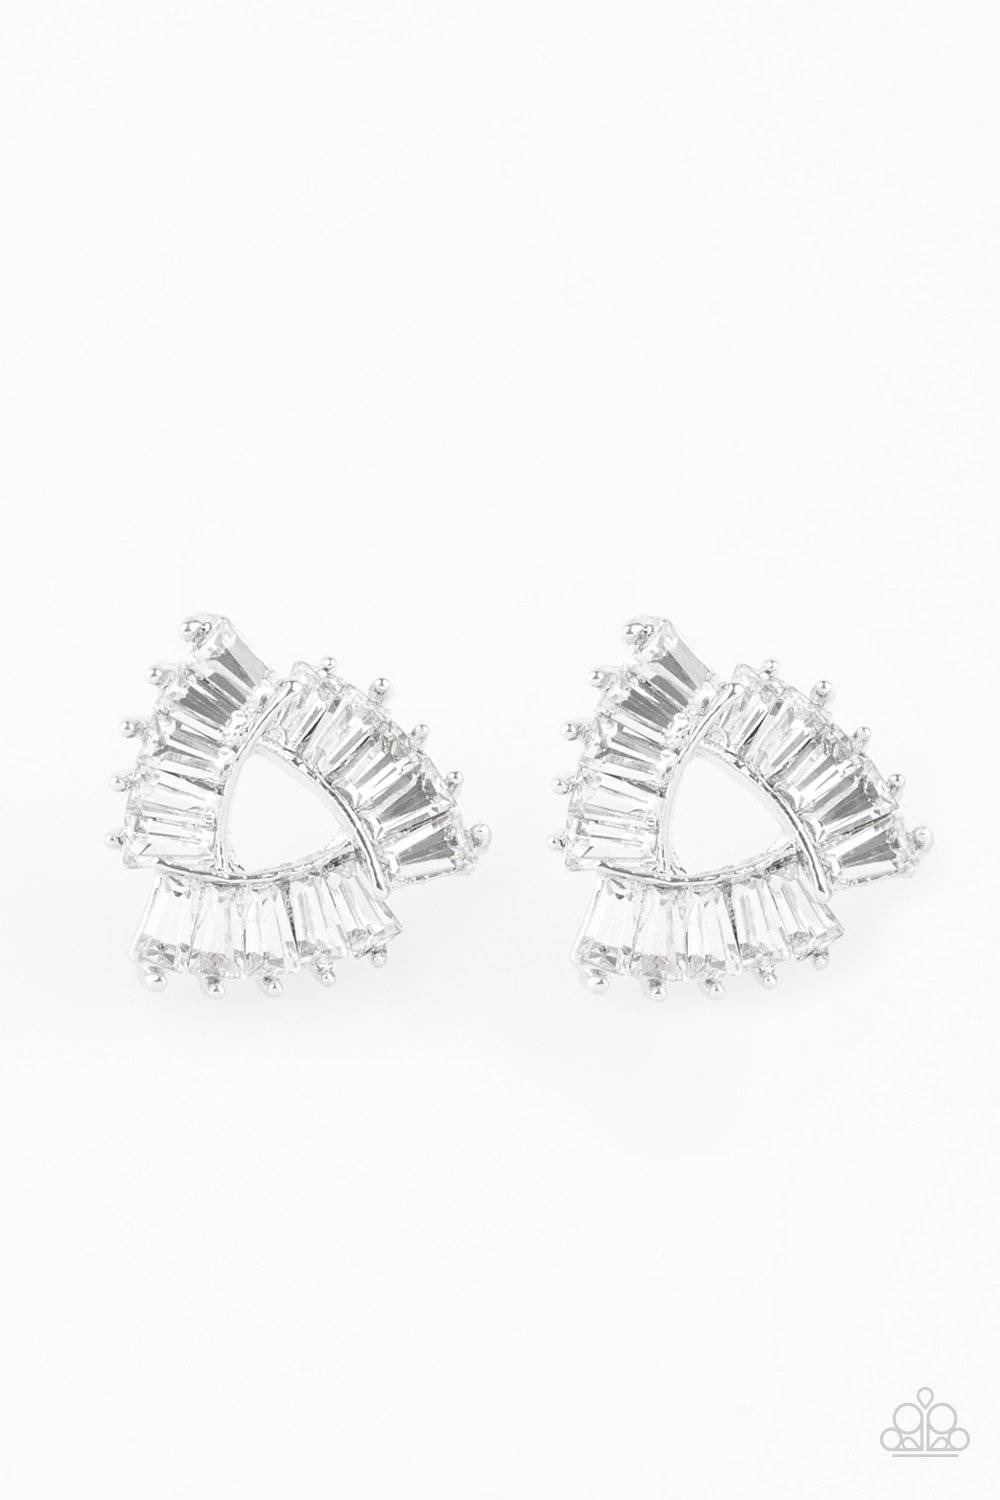 Renegade Shimmer White Earrings - Paparazzi Accessories - GlaMarous Titi Jewels